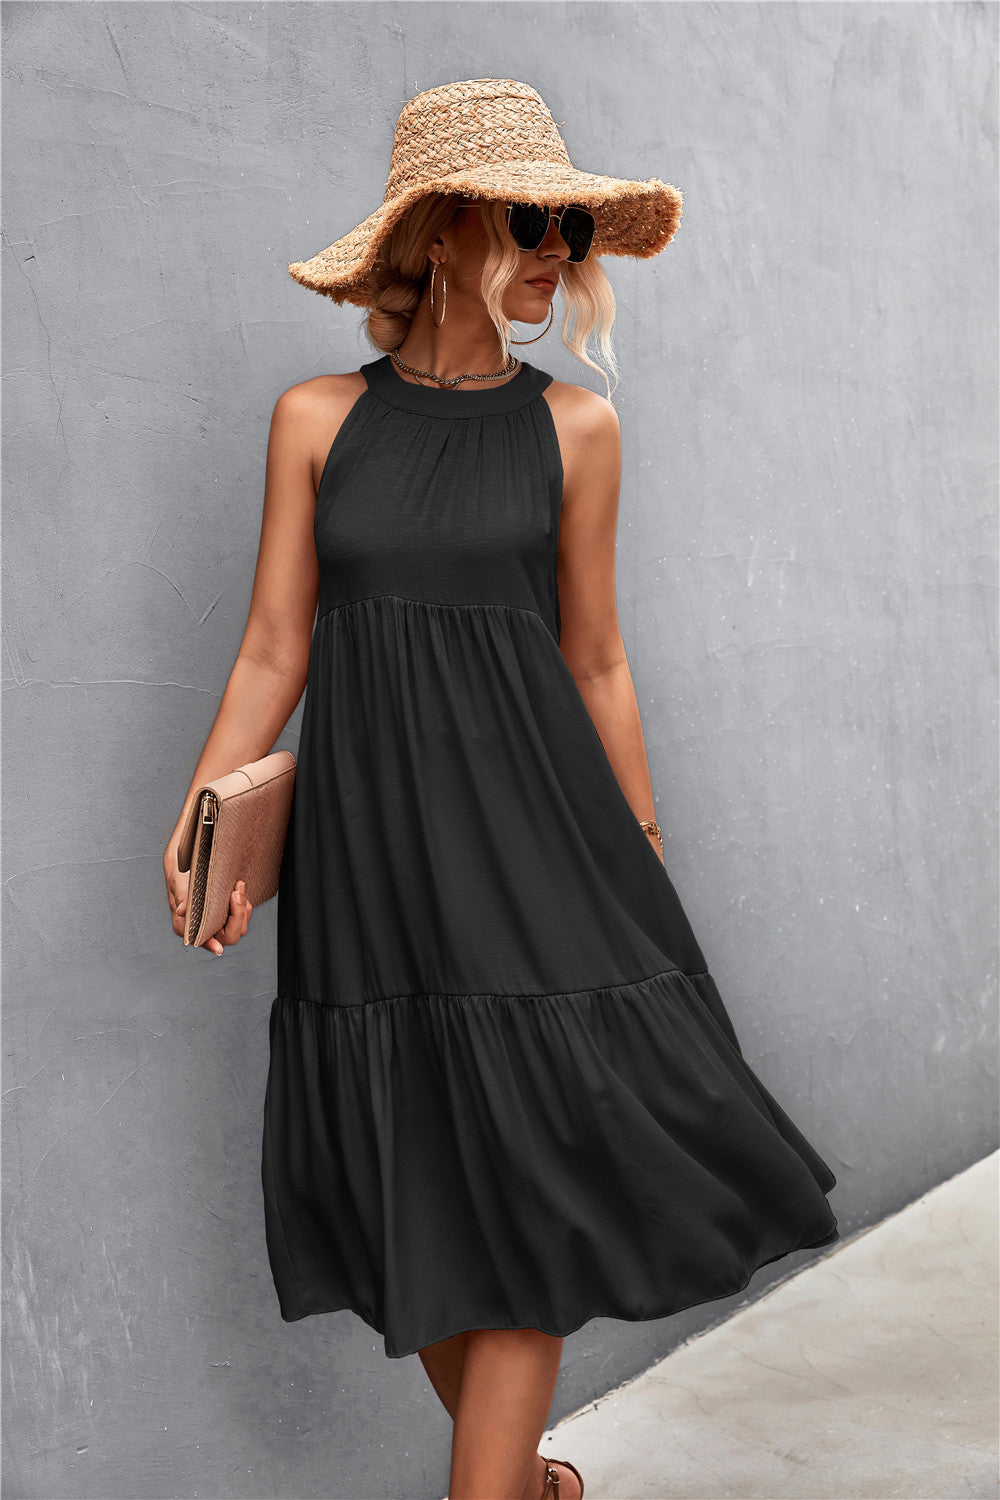 Women's Loose Splicing Casual Halter Stitching Dress